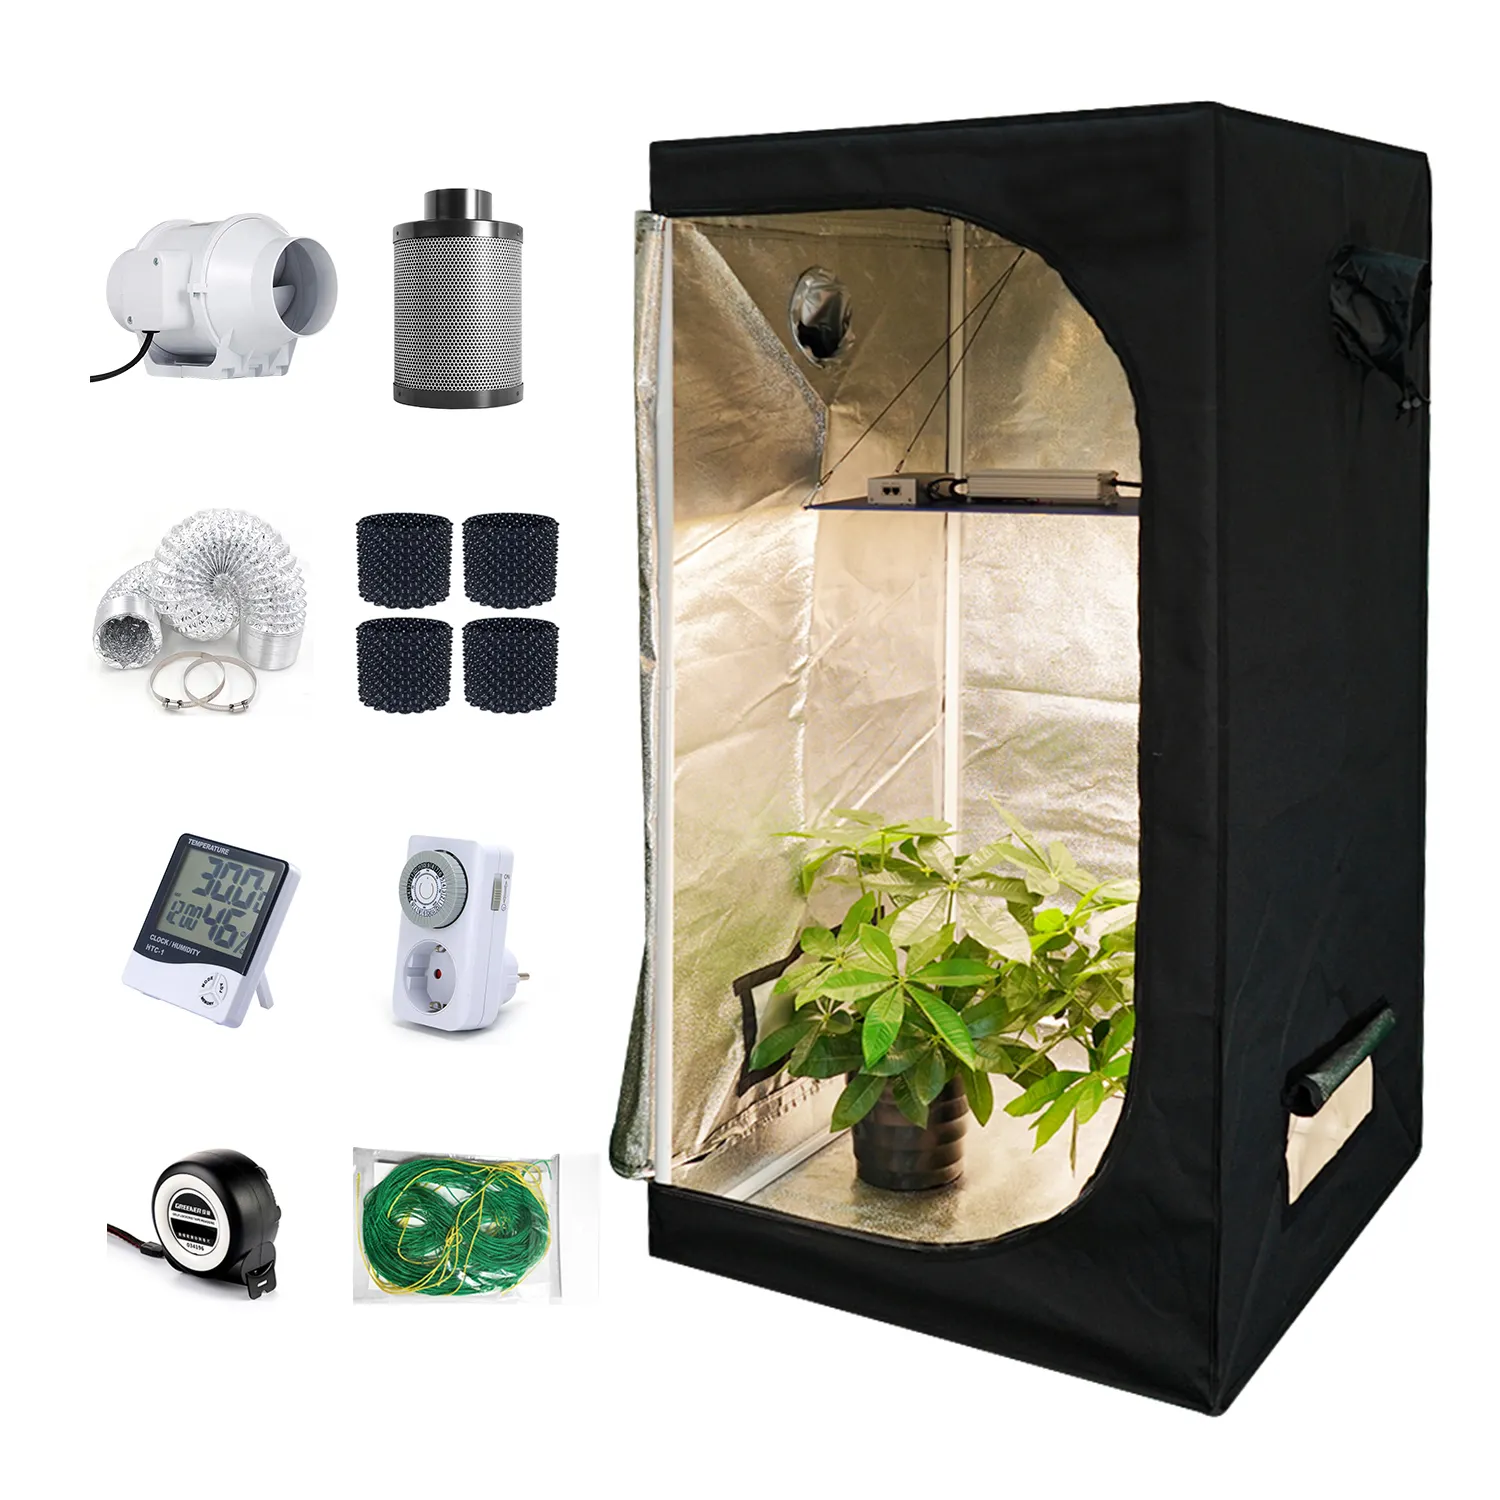 Euro Warehouse System Planter Grower Light grow tente kit complet 4x4 2X2 Tent Growing 720W Led Grow Light From Horticulture